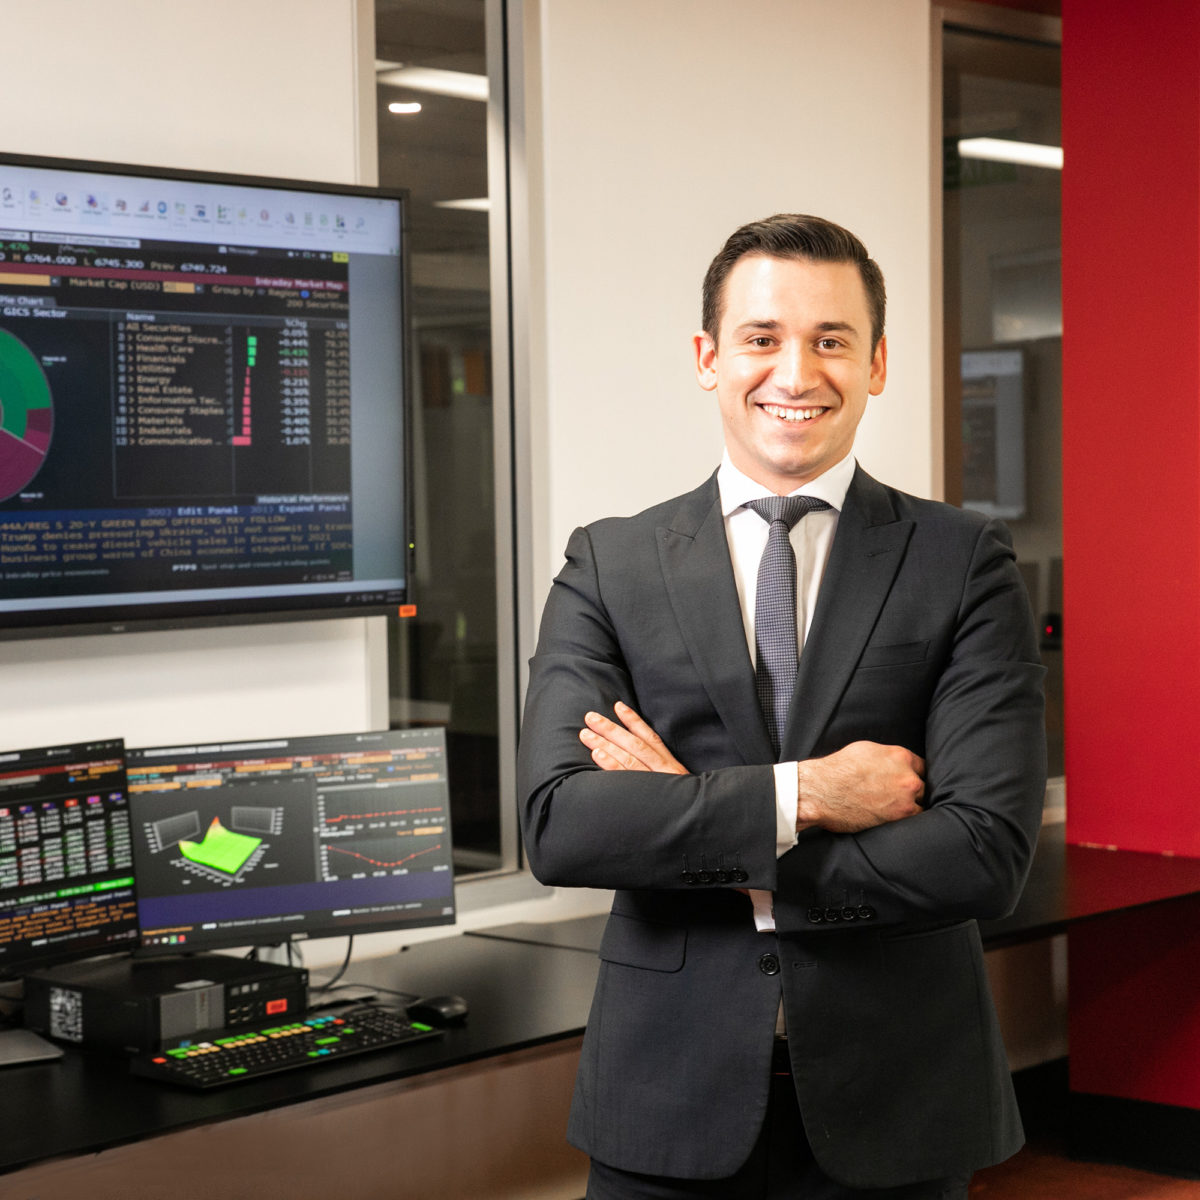 Student Investment Fund prepared Griffith alumnus for future world of work  – Griffith News